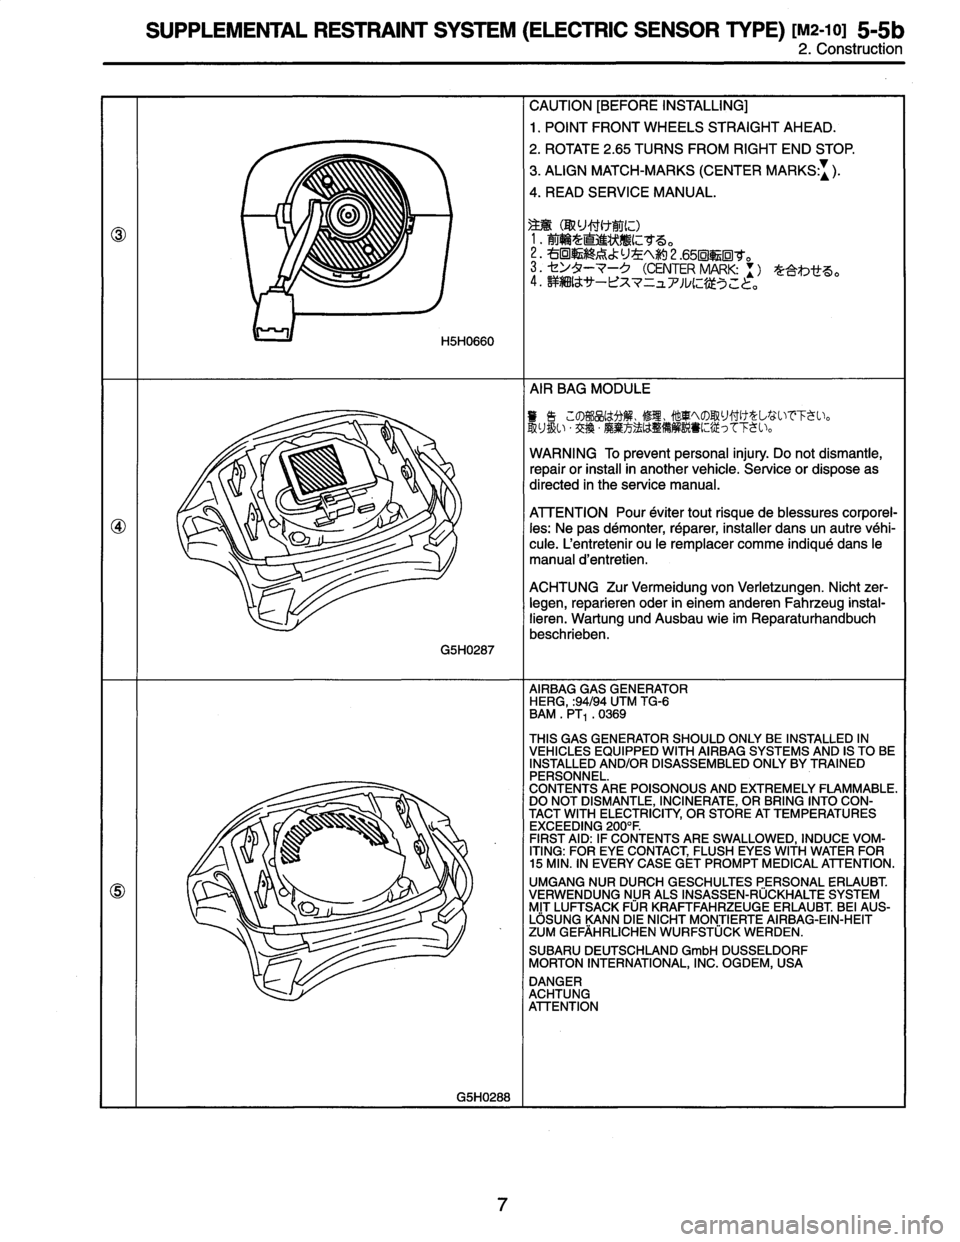 SUBARU LEGACY 1996  Service Repair Manual 
SUPPLEMENTAL
RESTRAINT
SYSTEM
(ELECTRIC
SENSOR
TYPE)
[M2-10]
5-5b
2
.
Construction

U

Ullv

H5H0660

CAUTION
[BEFORE
INSTALLING]

1.
POINT
FRONT
WHEELS
STRAIGHT
AHEAD
.

2
.
ROTATE
2
.65
TURNS
FRO